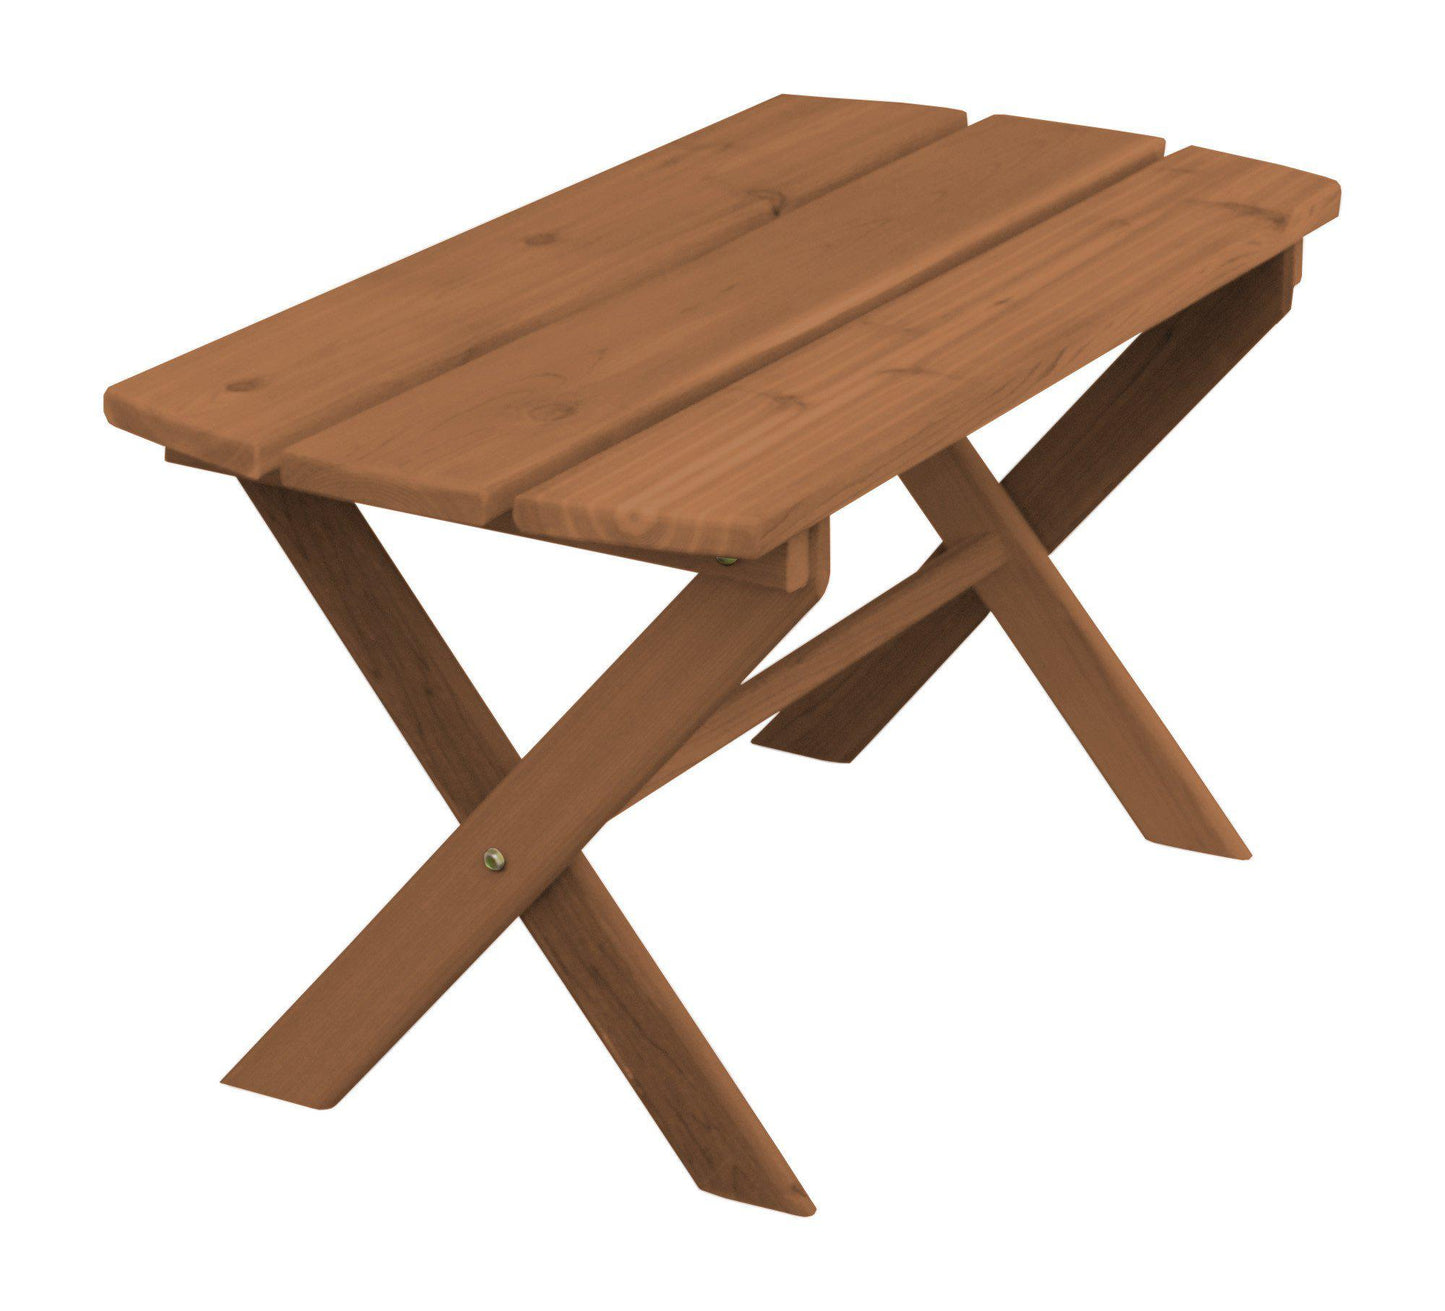 A&L Furniture Co. Western Red Cedar Folding Coffee Table - LEAD TIME TO SHIP 4 WEEKS OR LESS